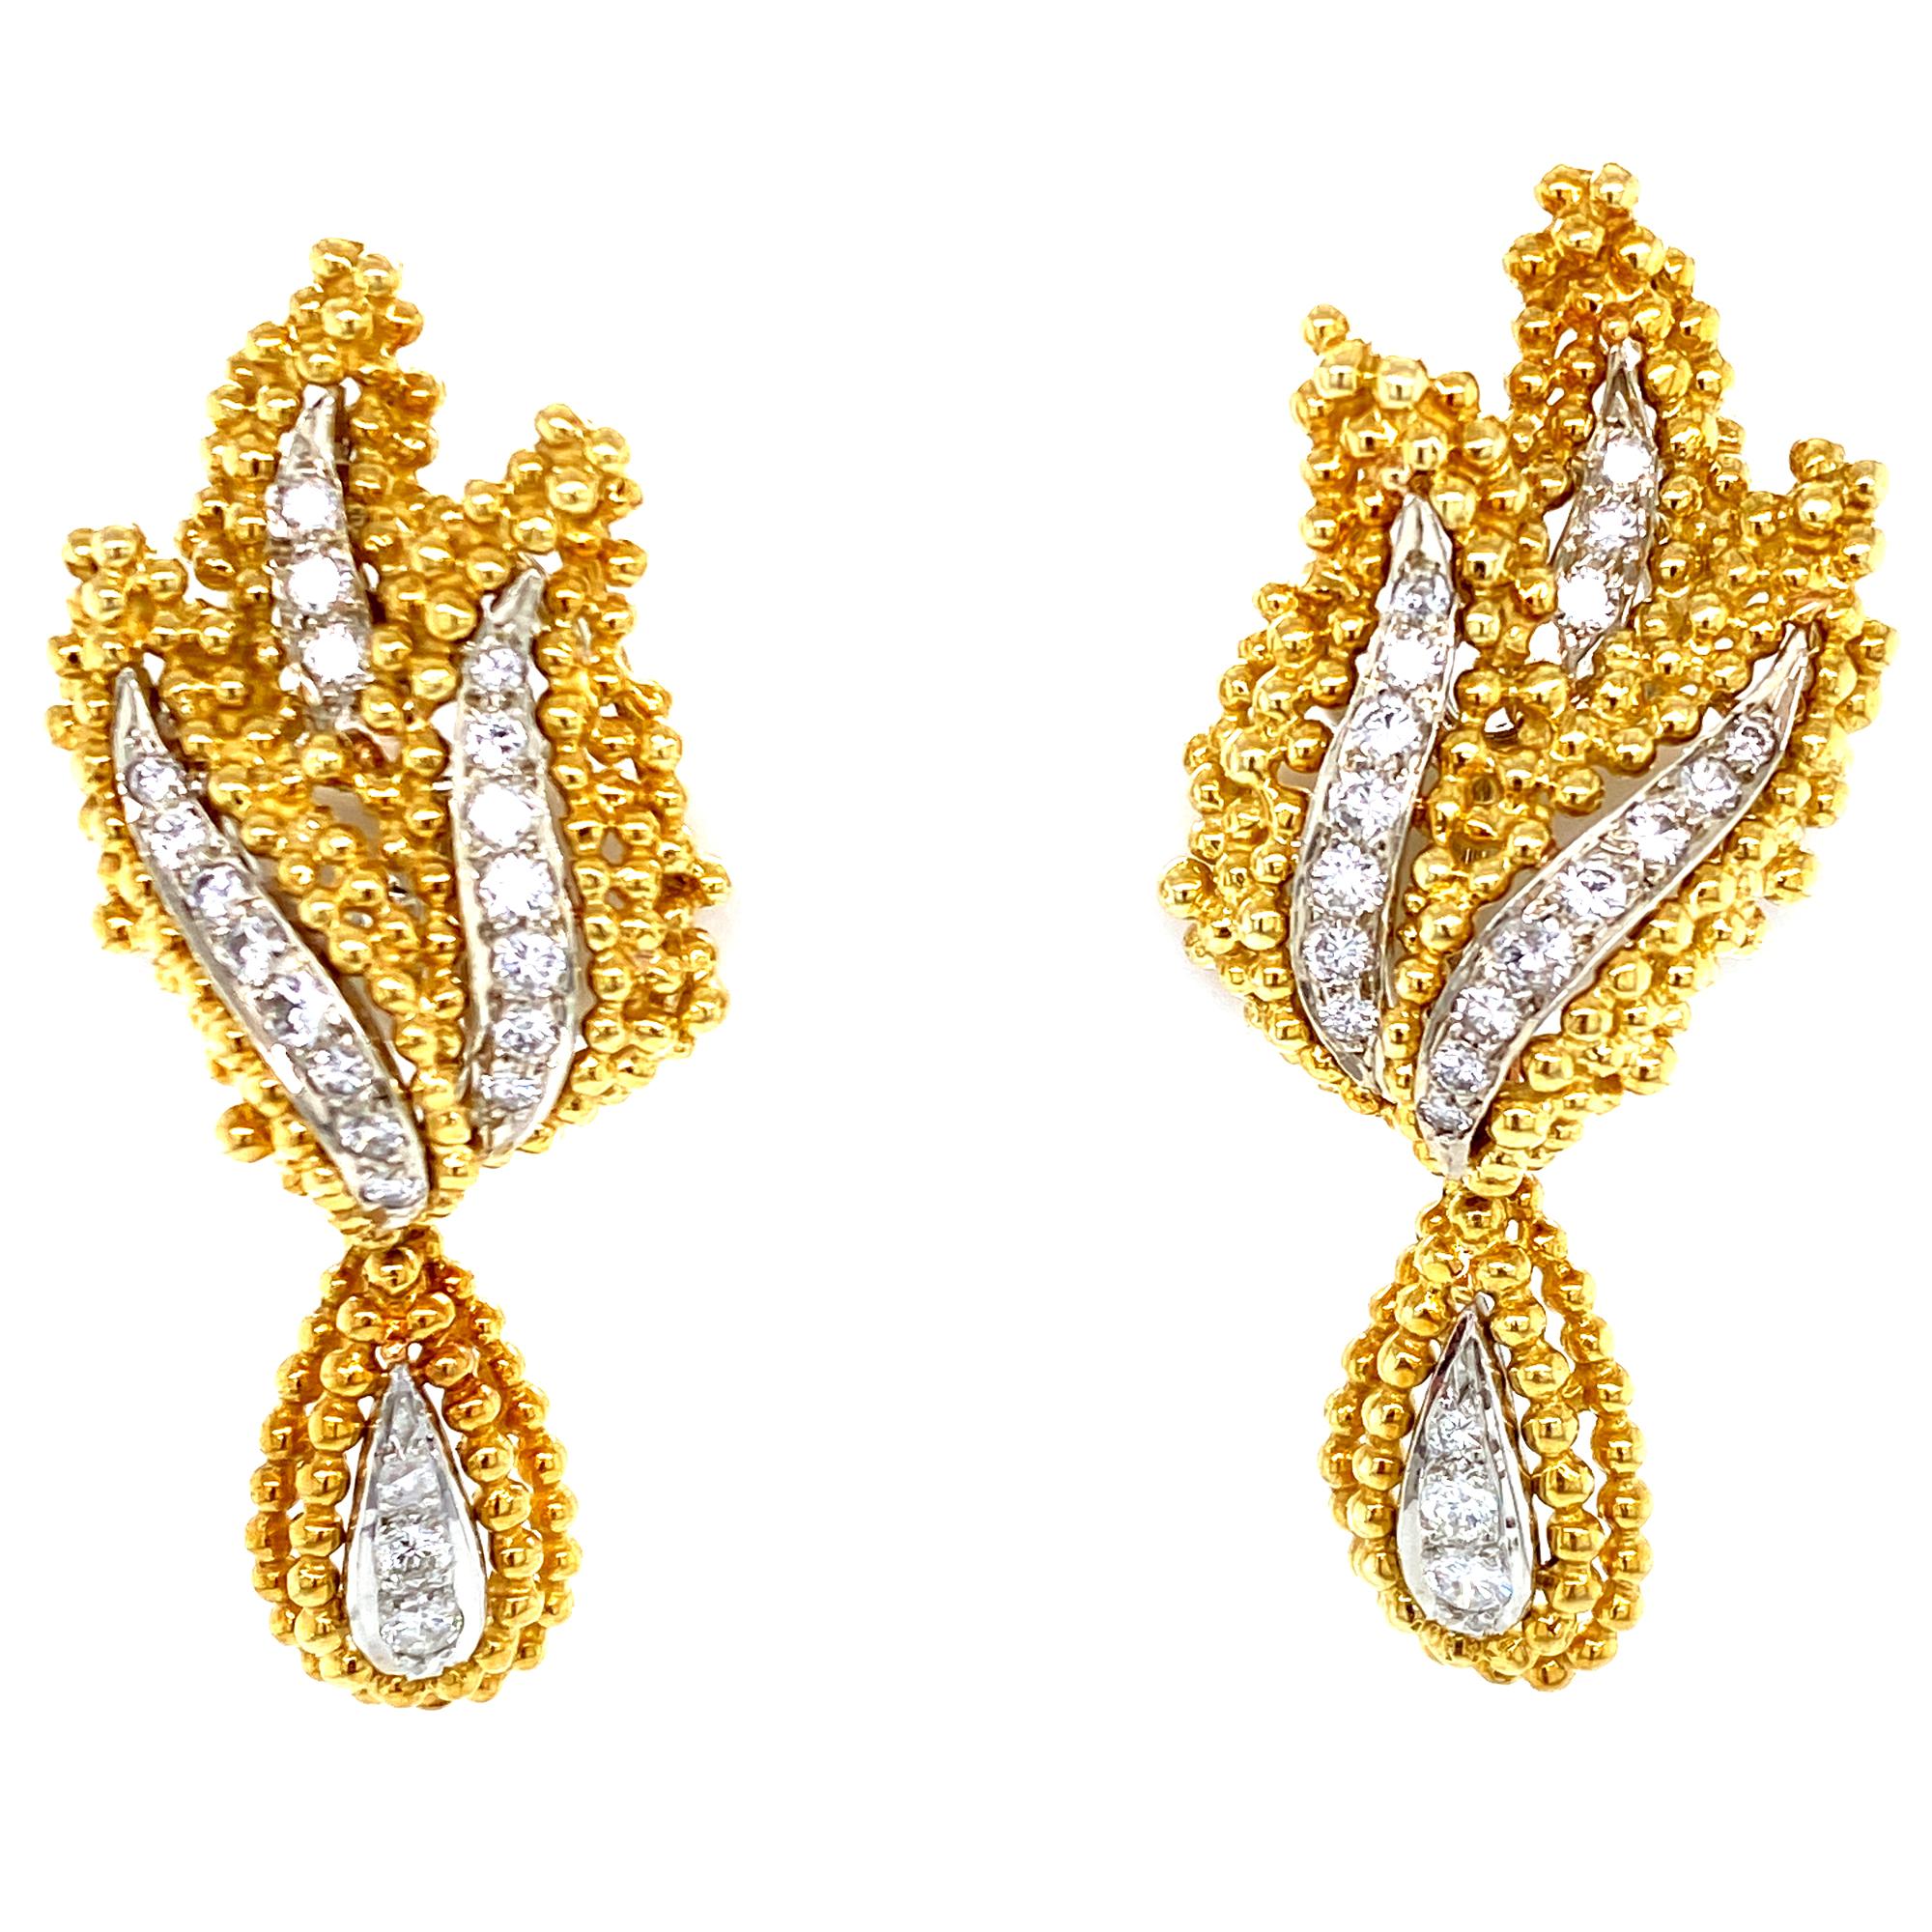 These fabulous drop leaf earrings are fashioned in 18 karat white and yellow gold. The earrings feature sparking round brilliant cut diamonds graded F-G color and VS clarity (1.00CTW). The earrings measure 2.00 inches in length,  .75 inches in